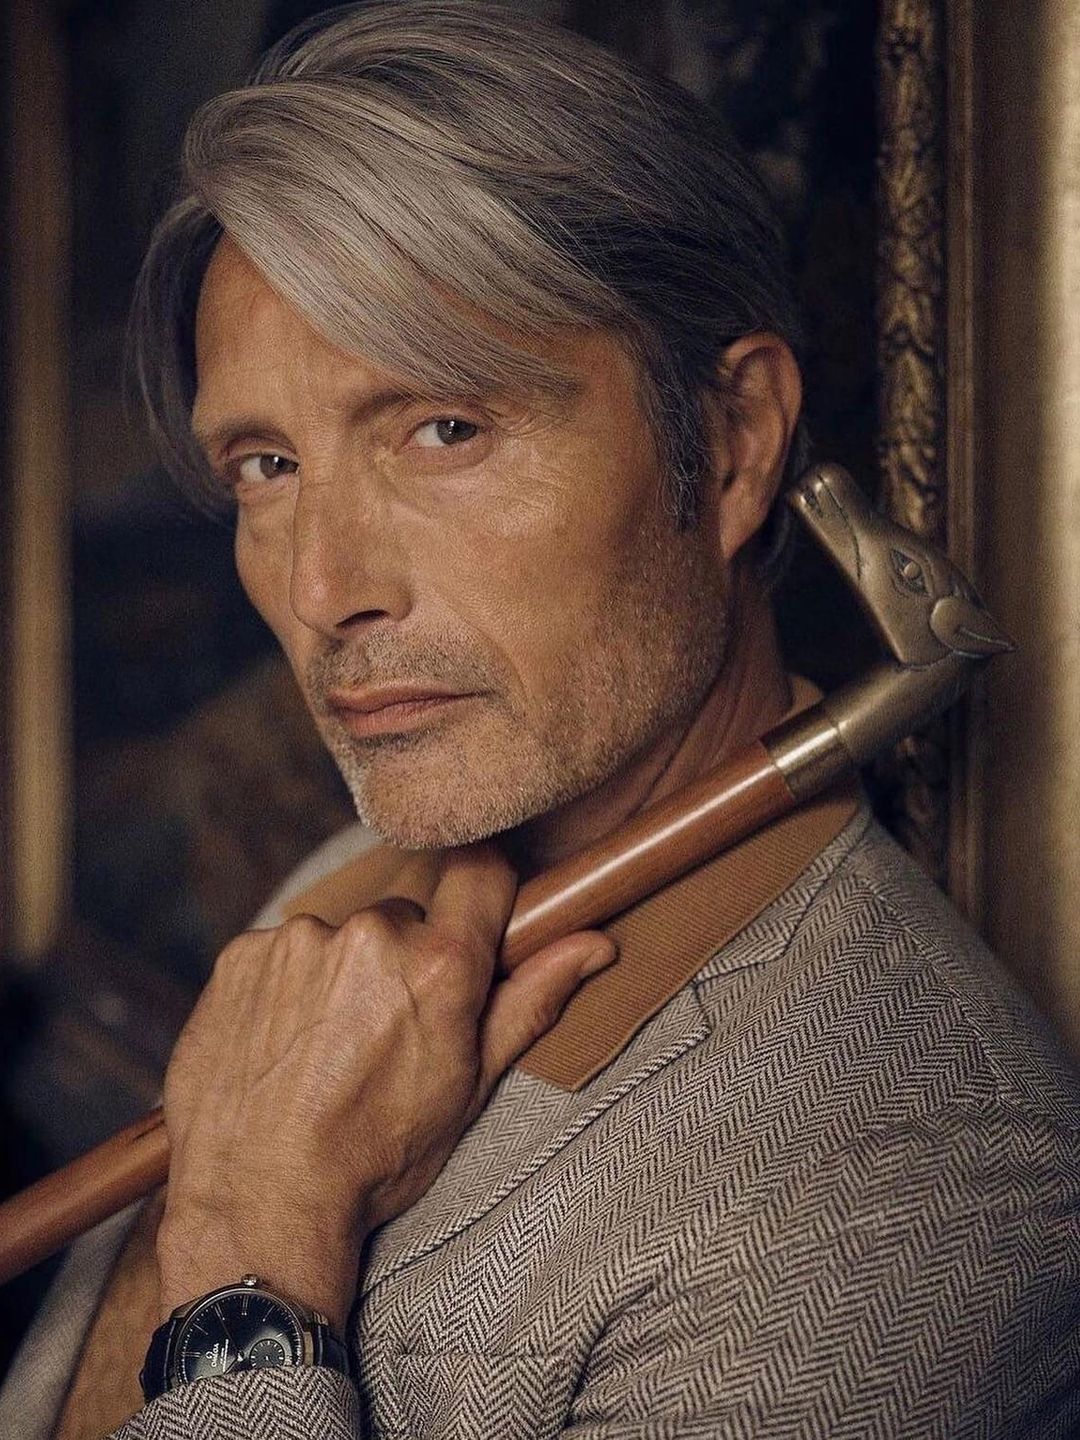 Mads Mikkelsen who is he